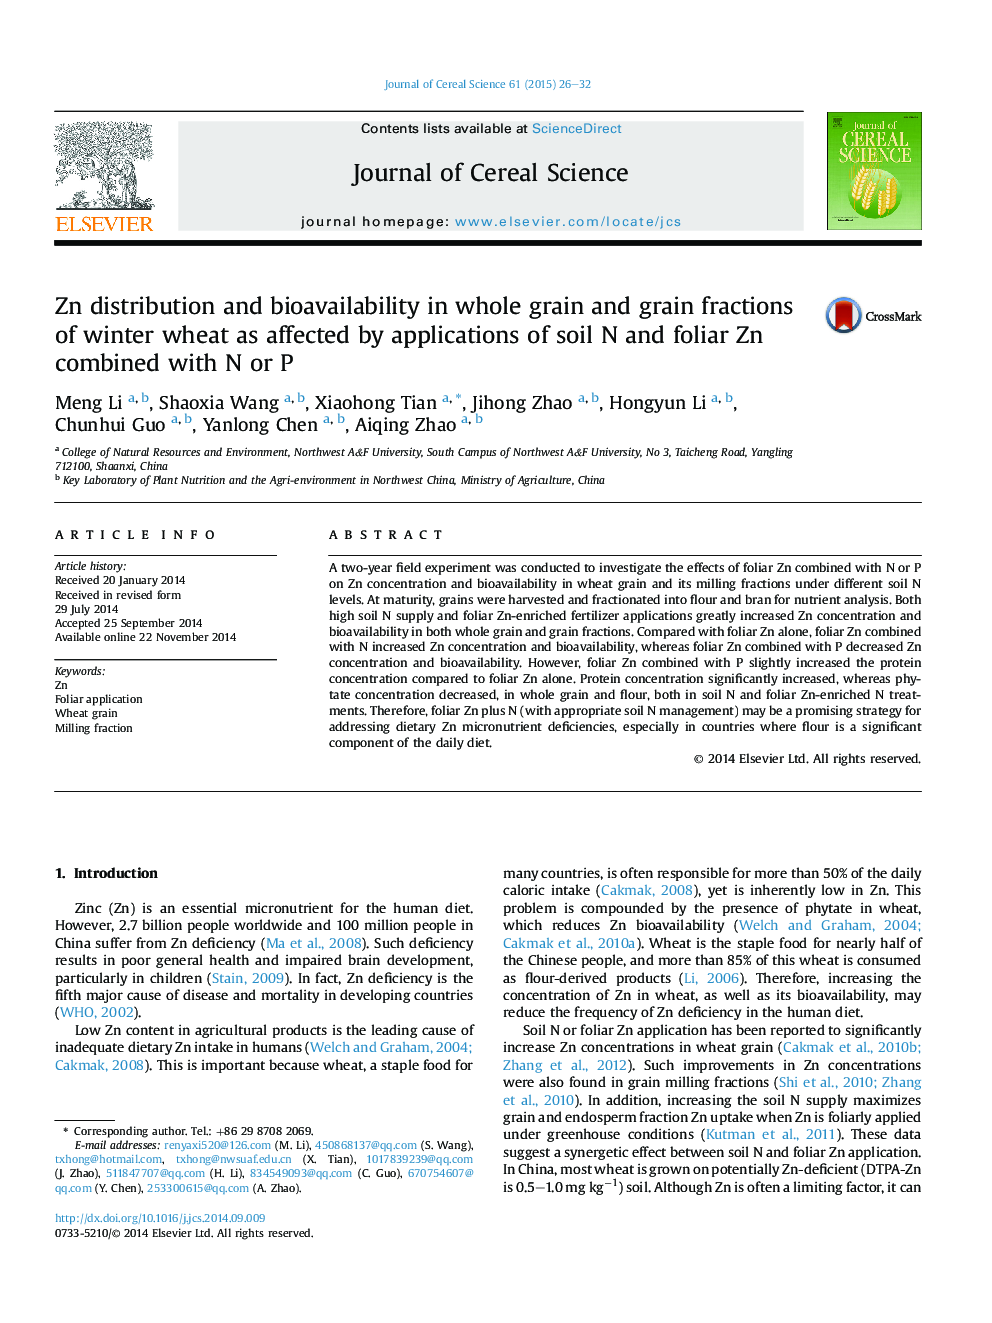 Zn distribution and bioavailability in whole grain and grain fractions of winter wheat as affected by applications of soil N and foliar Zn combined with N or P